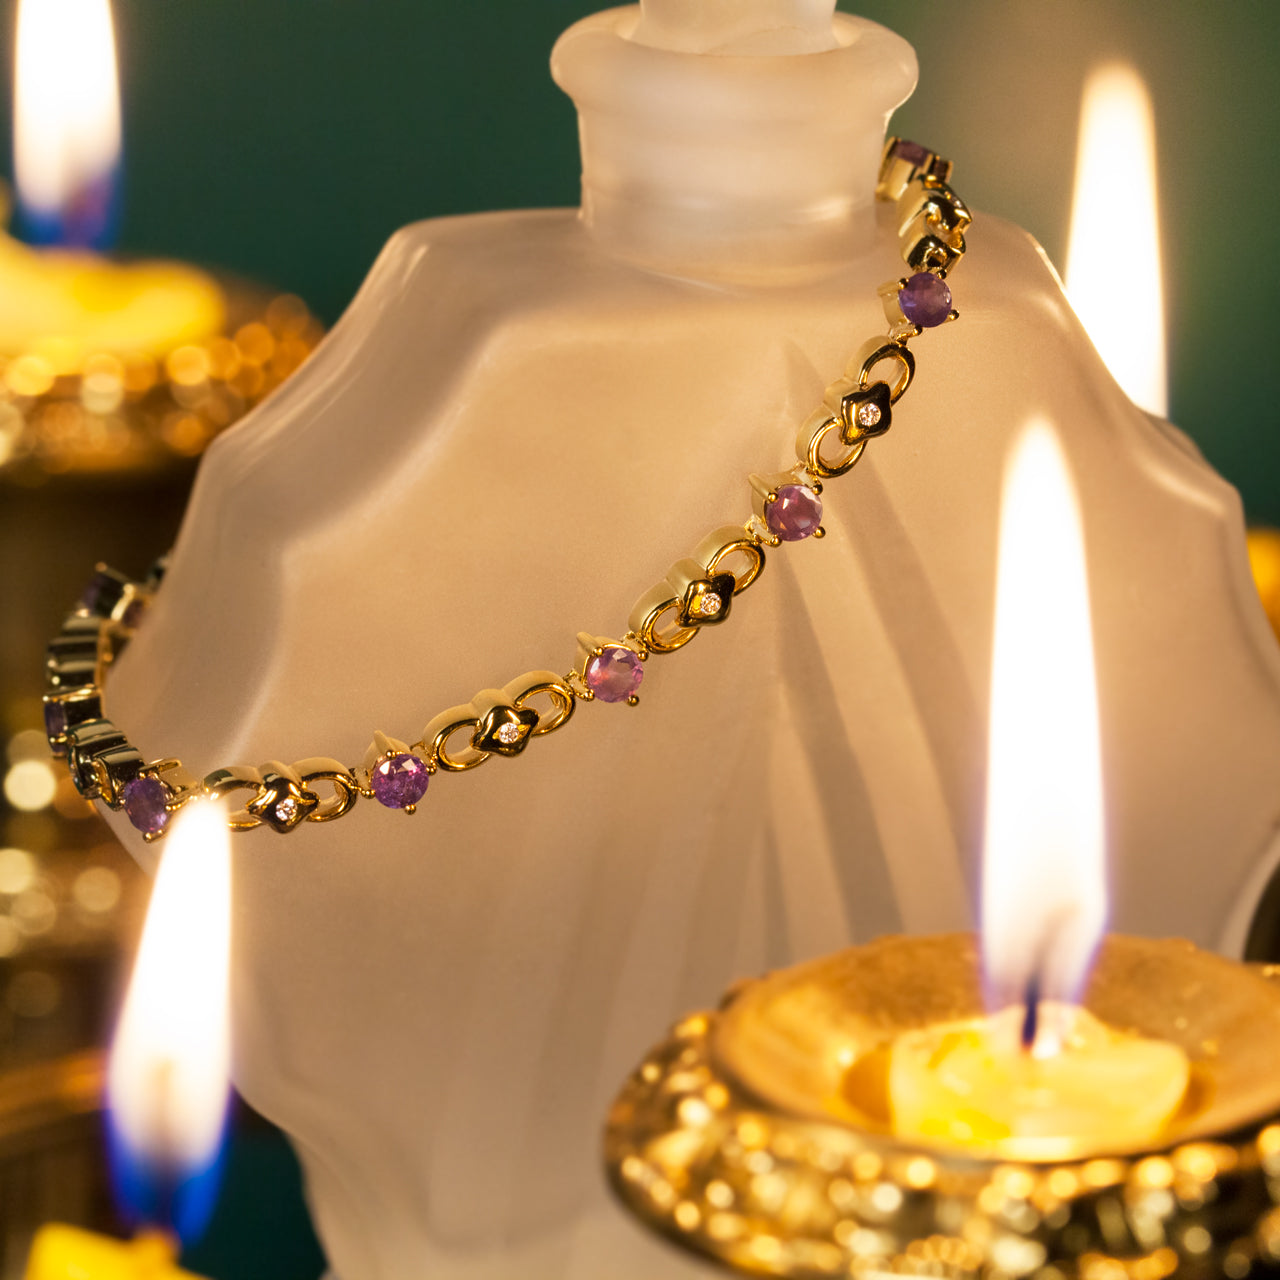 Detail of the 3.00ctw natural alexandrite 18k yellow gold bracelet with its vibrant purple stones resting on a candle for an atmospheric display